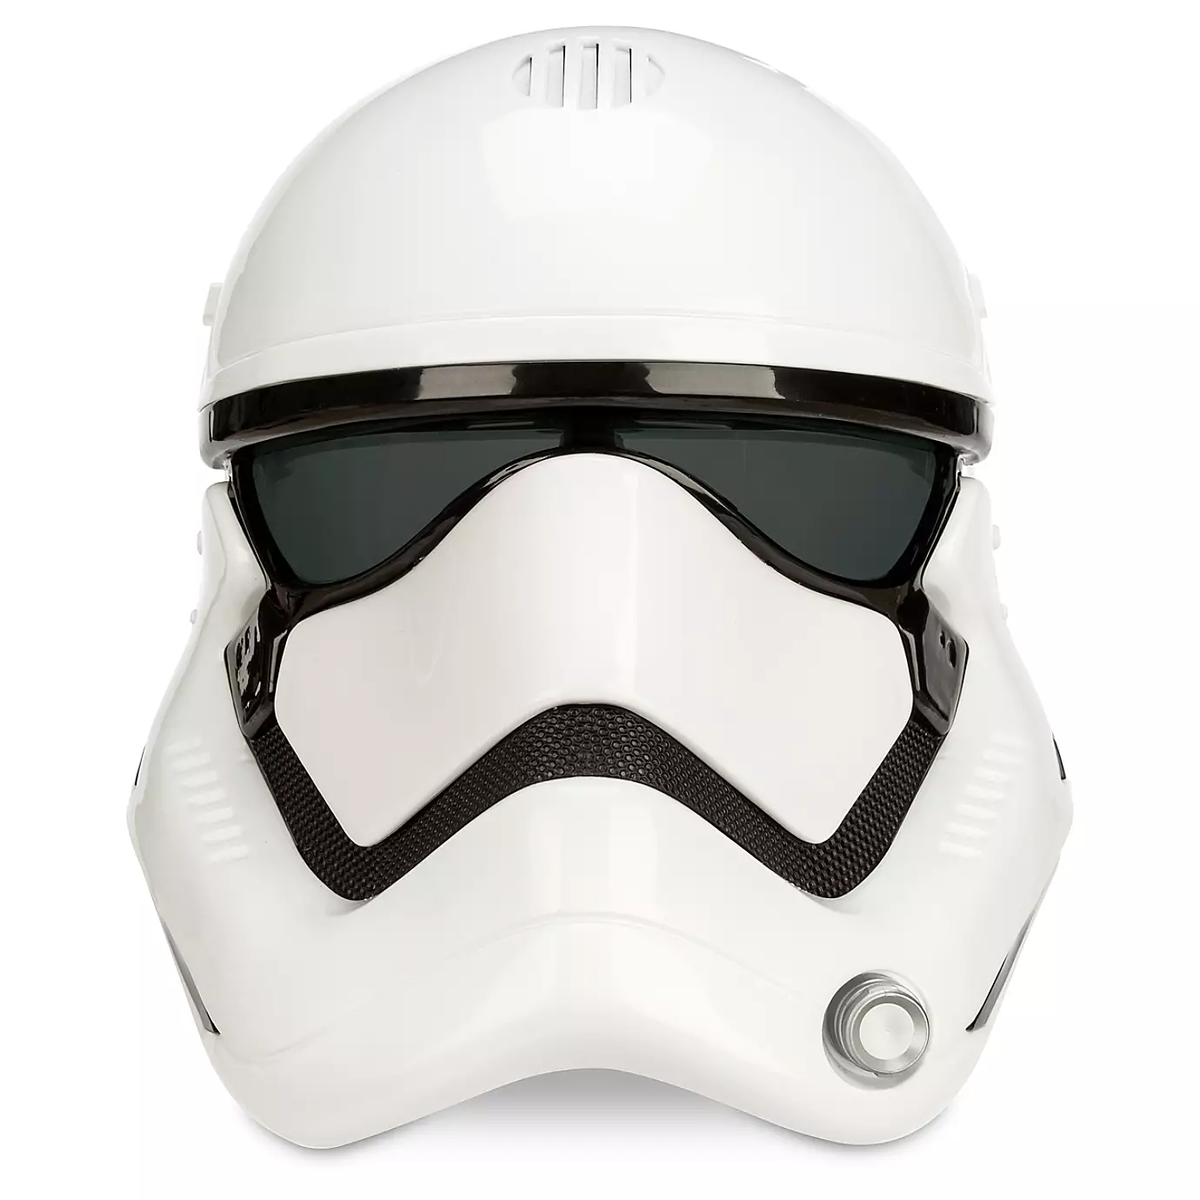 Stormtrooper Voice Changing Mask from Star Wars